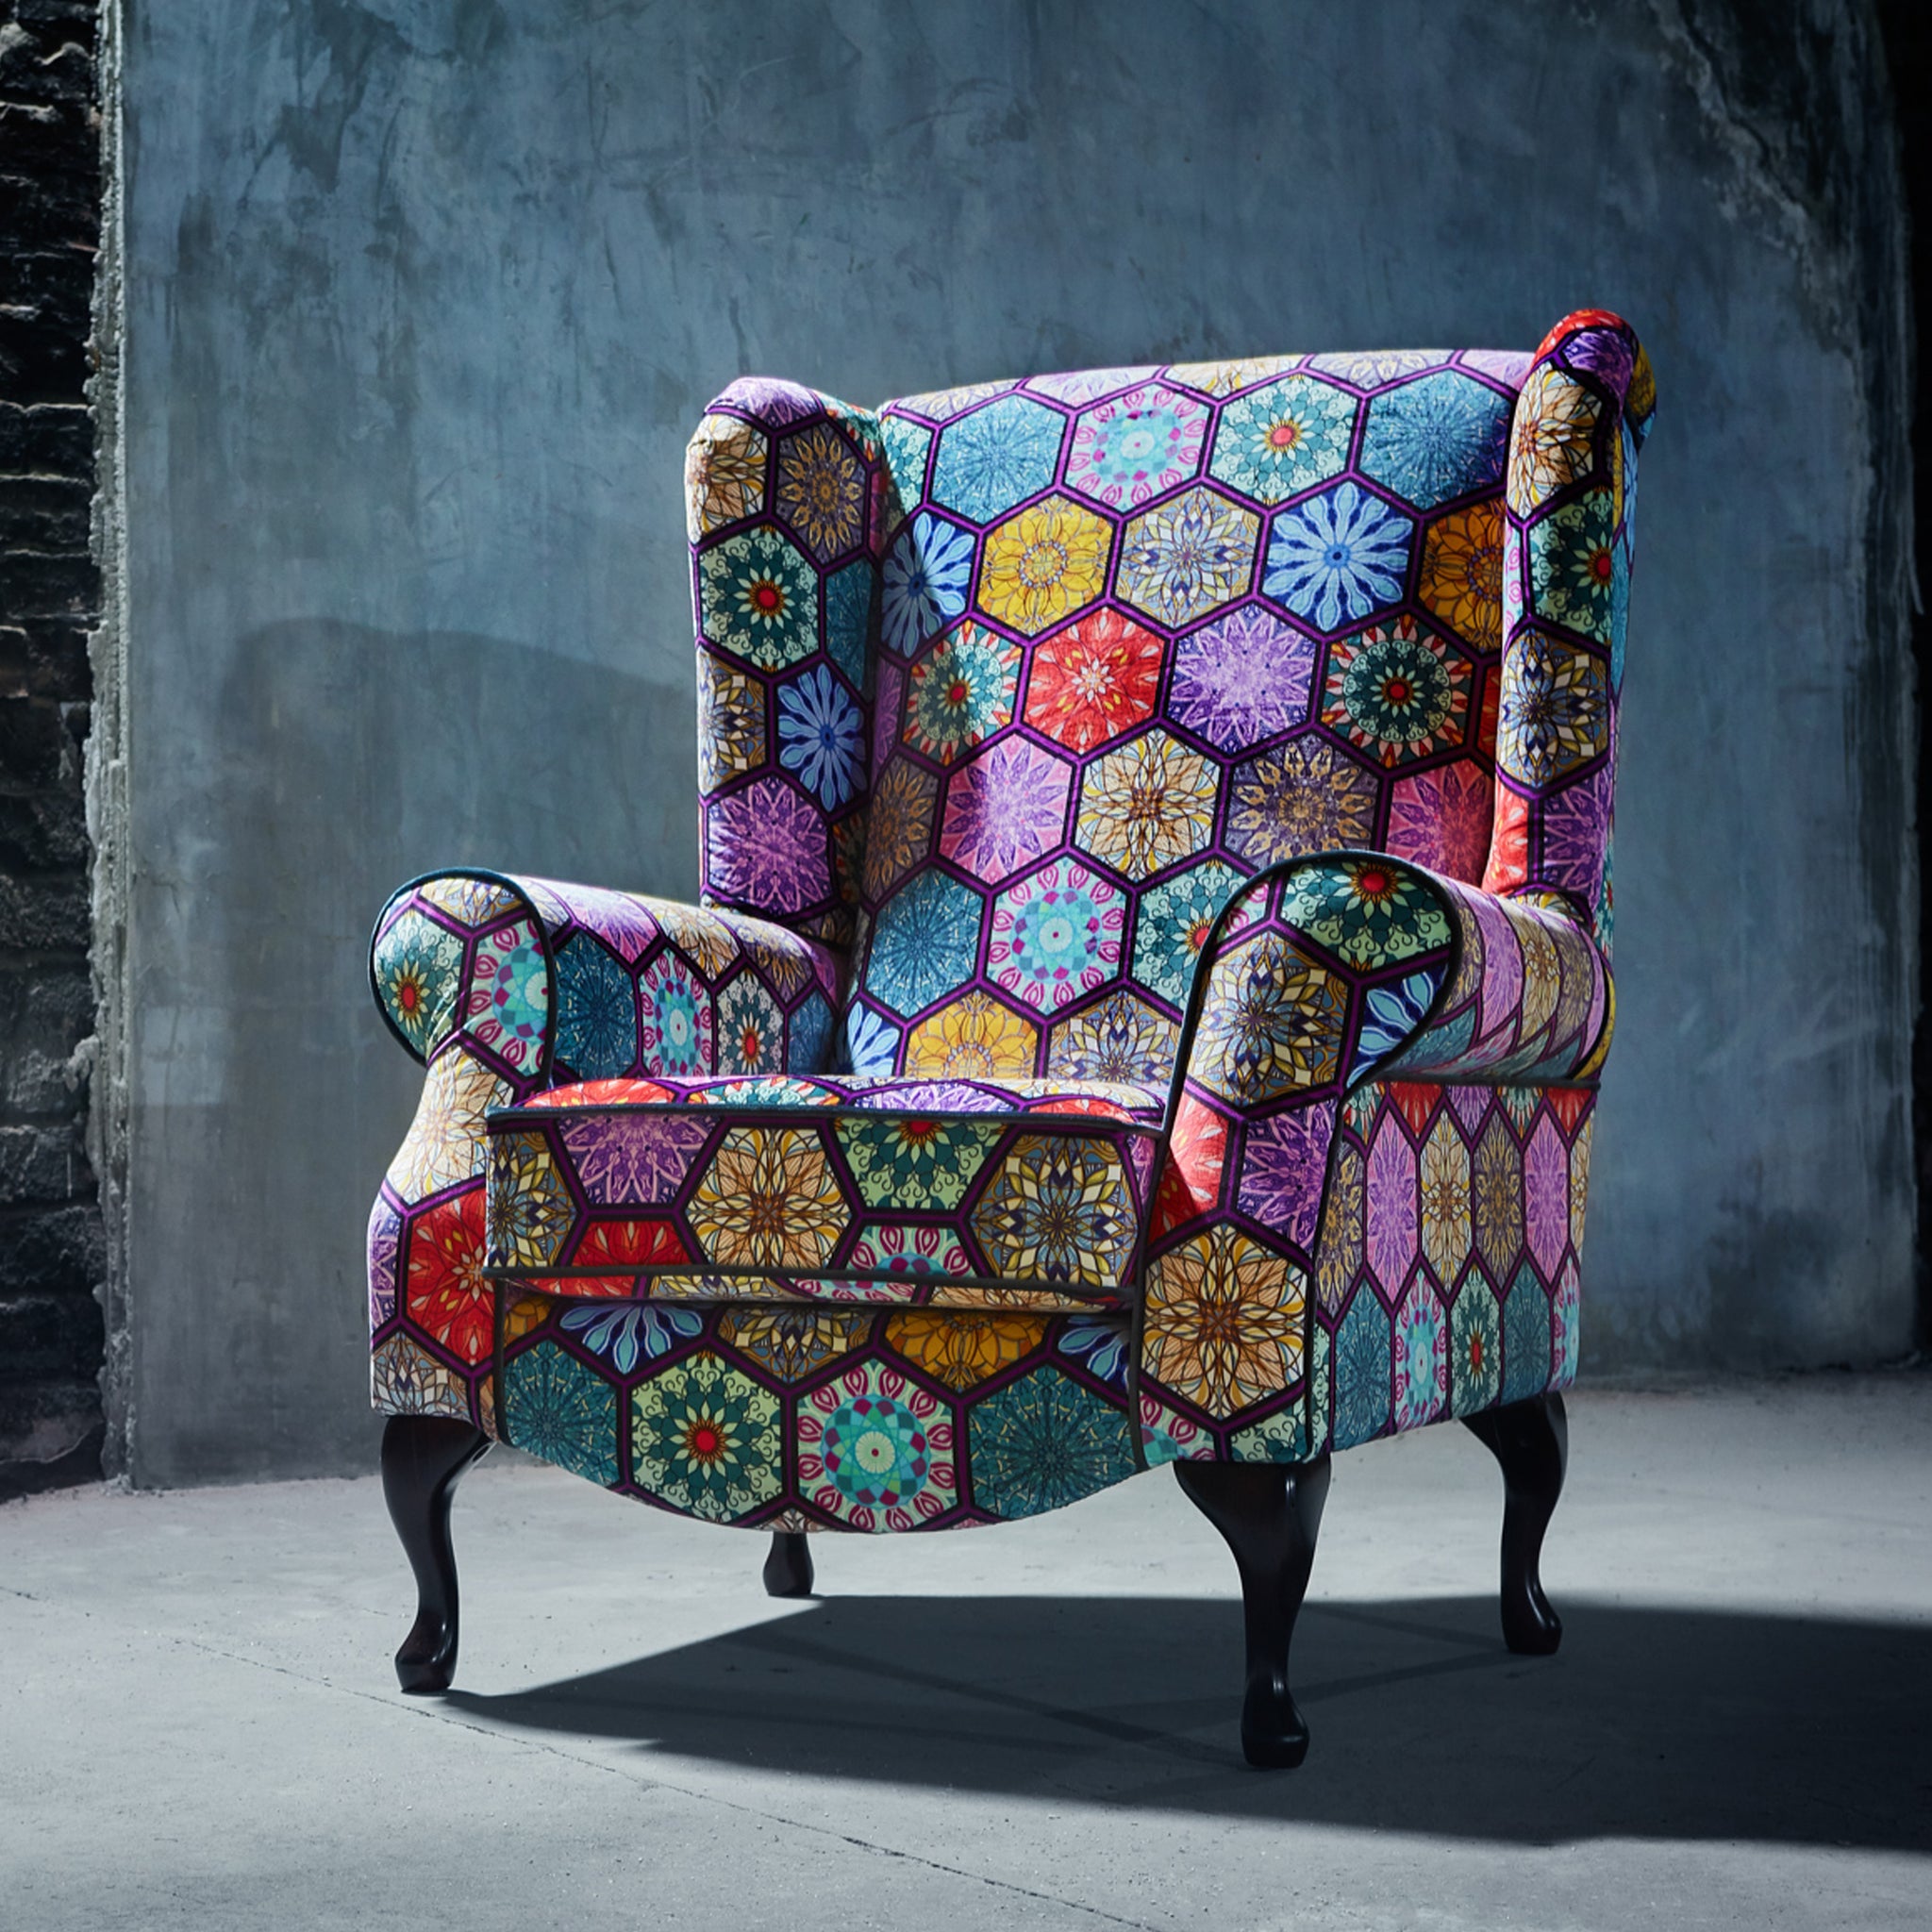 Patchwork Armchair. Boho style furniture. Quirky, queen anne